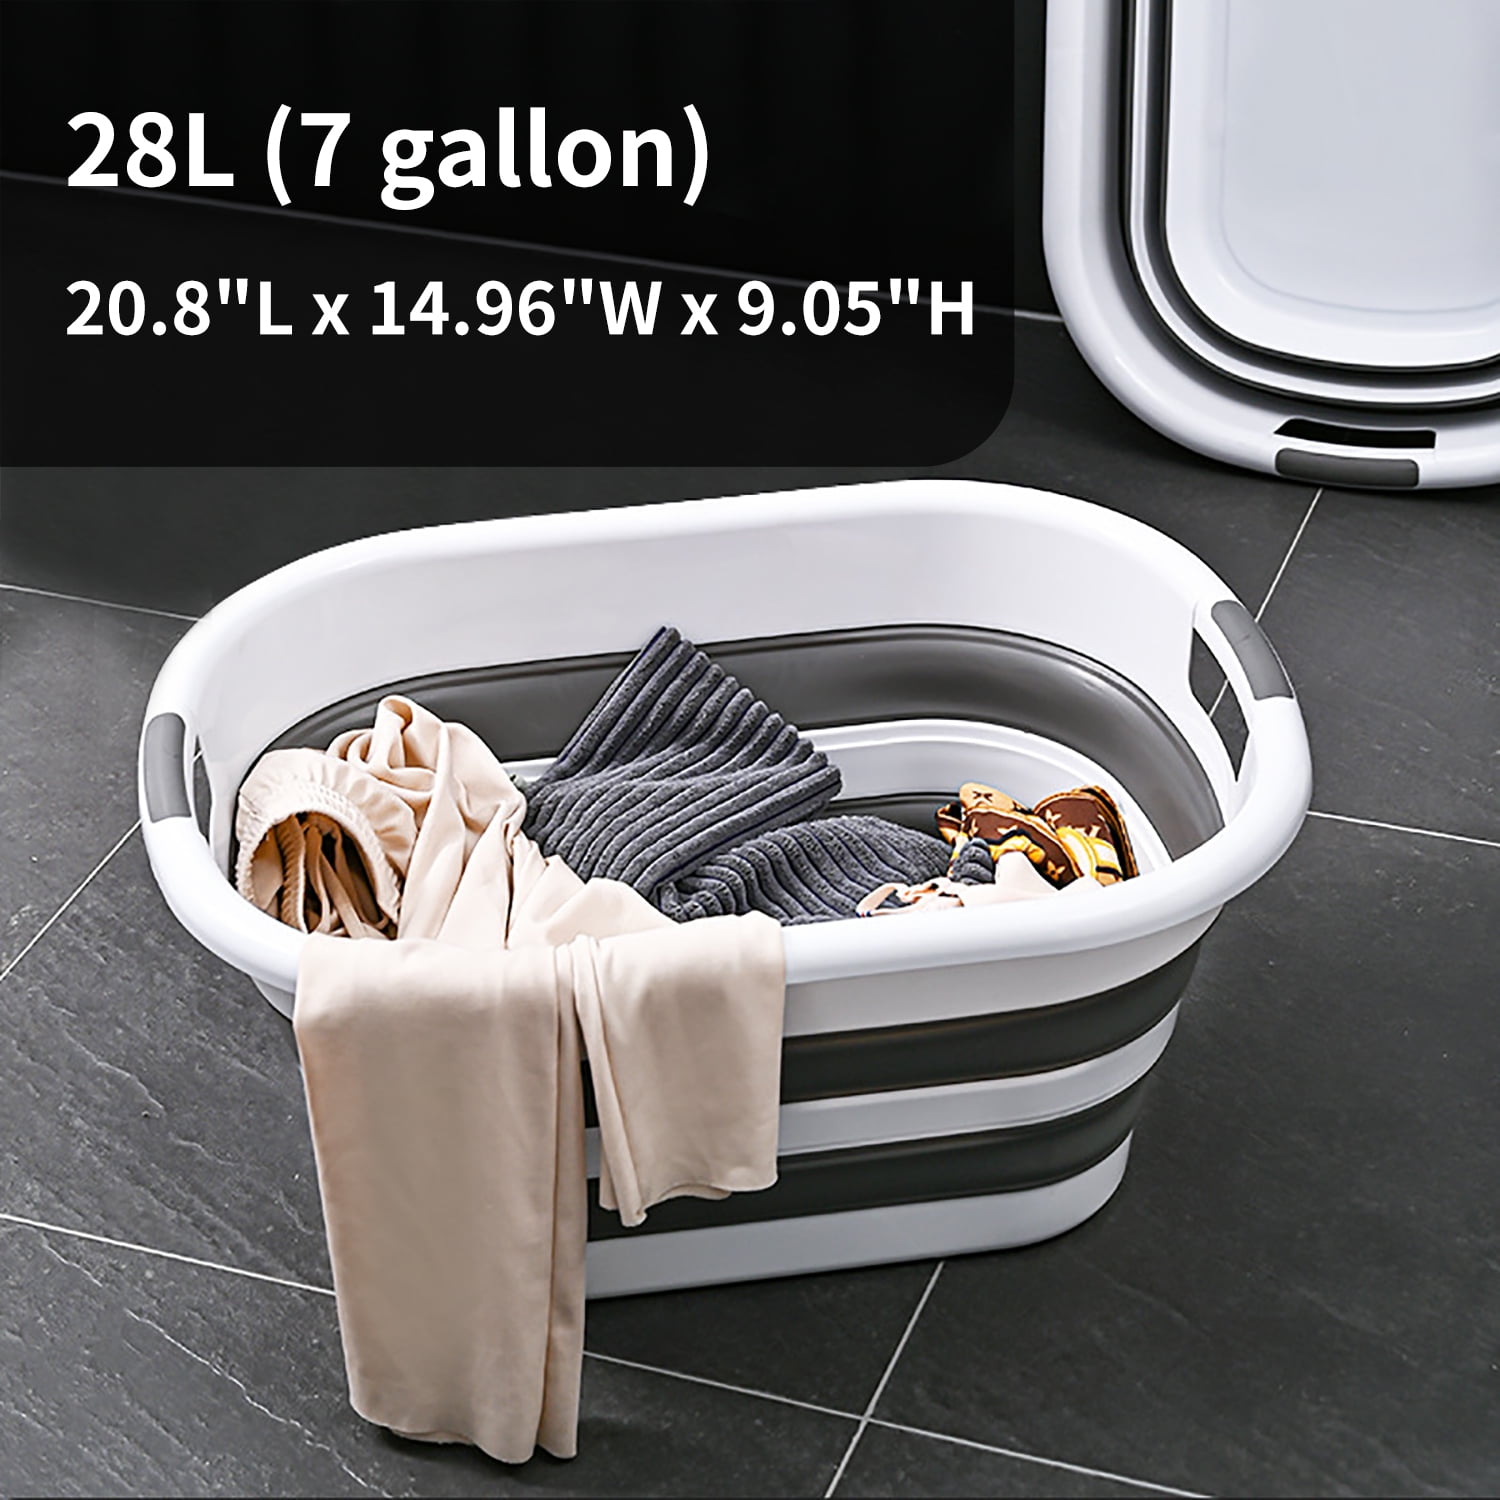 NewHome Collapsible Laundry Basket Space Saving Pop Up Cloth Bin Folding  Storage Container Organizer Hamper Basket With Comfort Handle 